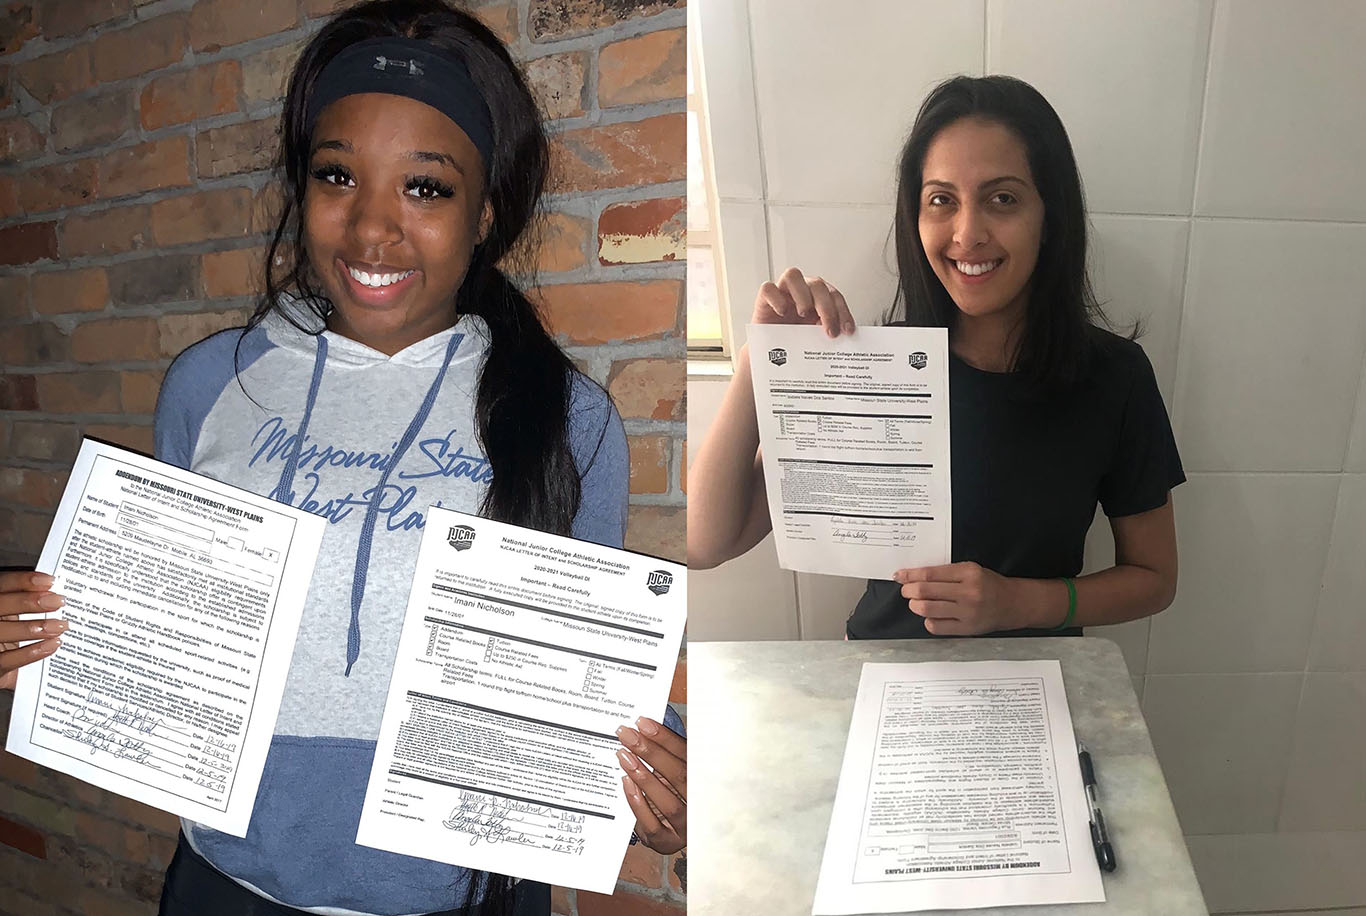 IMANI NICHOLSON, left, a 5-foot, 9-inch outside attacker from Mobile, Ala., and Izabela Dos Santos, a 6-foot, 2- inch middle from Minas Gerais, Brazil, recently signed paperwork to join the Missouri State University-West Plains Grizzly Volleyball team in fall 2020. (Photos provided)